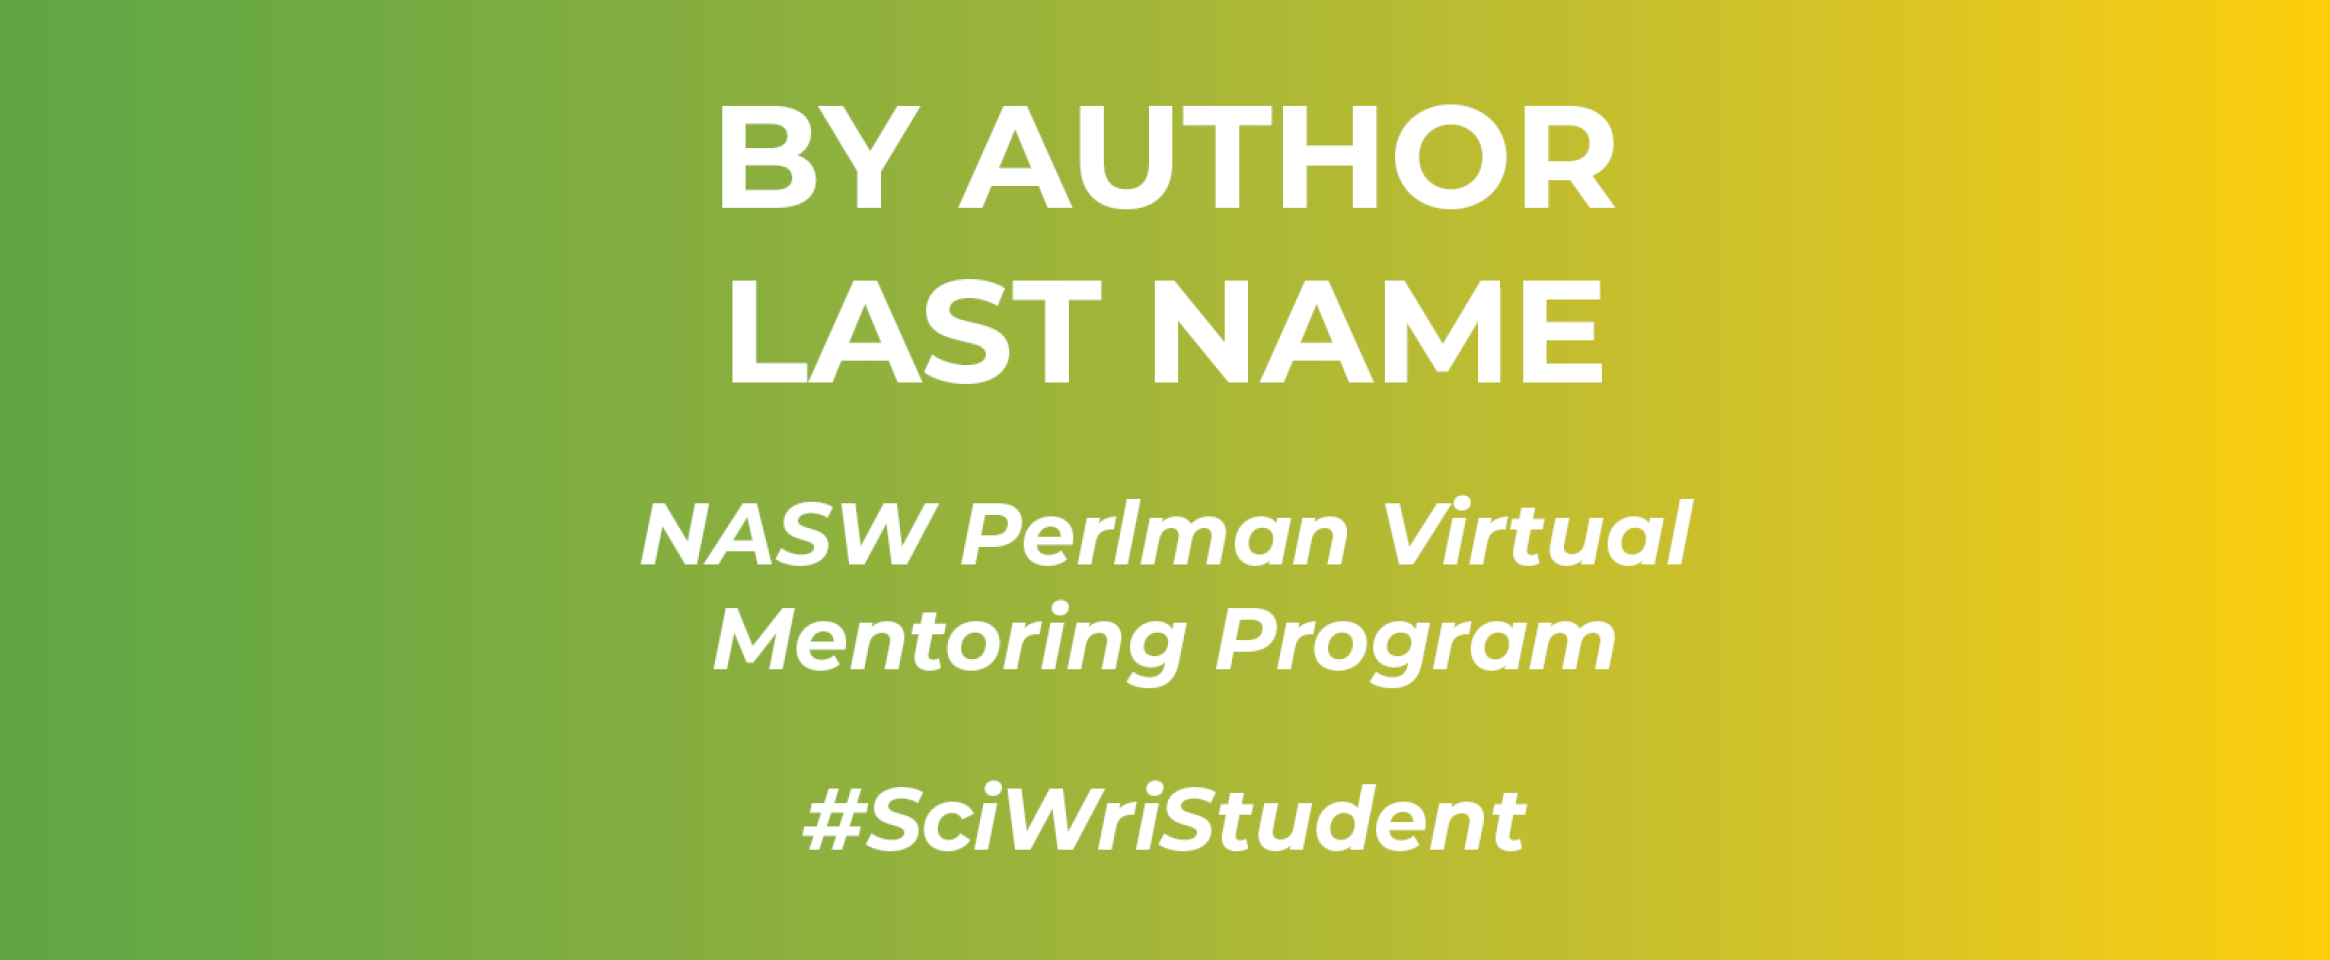 Horizontal graphic with text By Author Last Name and N A S W Perlman Virtual Mentoring Program, and hashtag Sci Wri Student